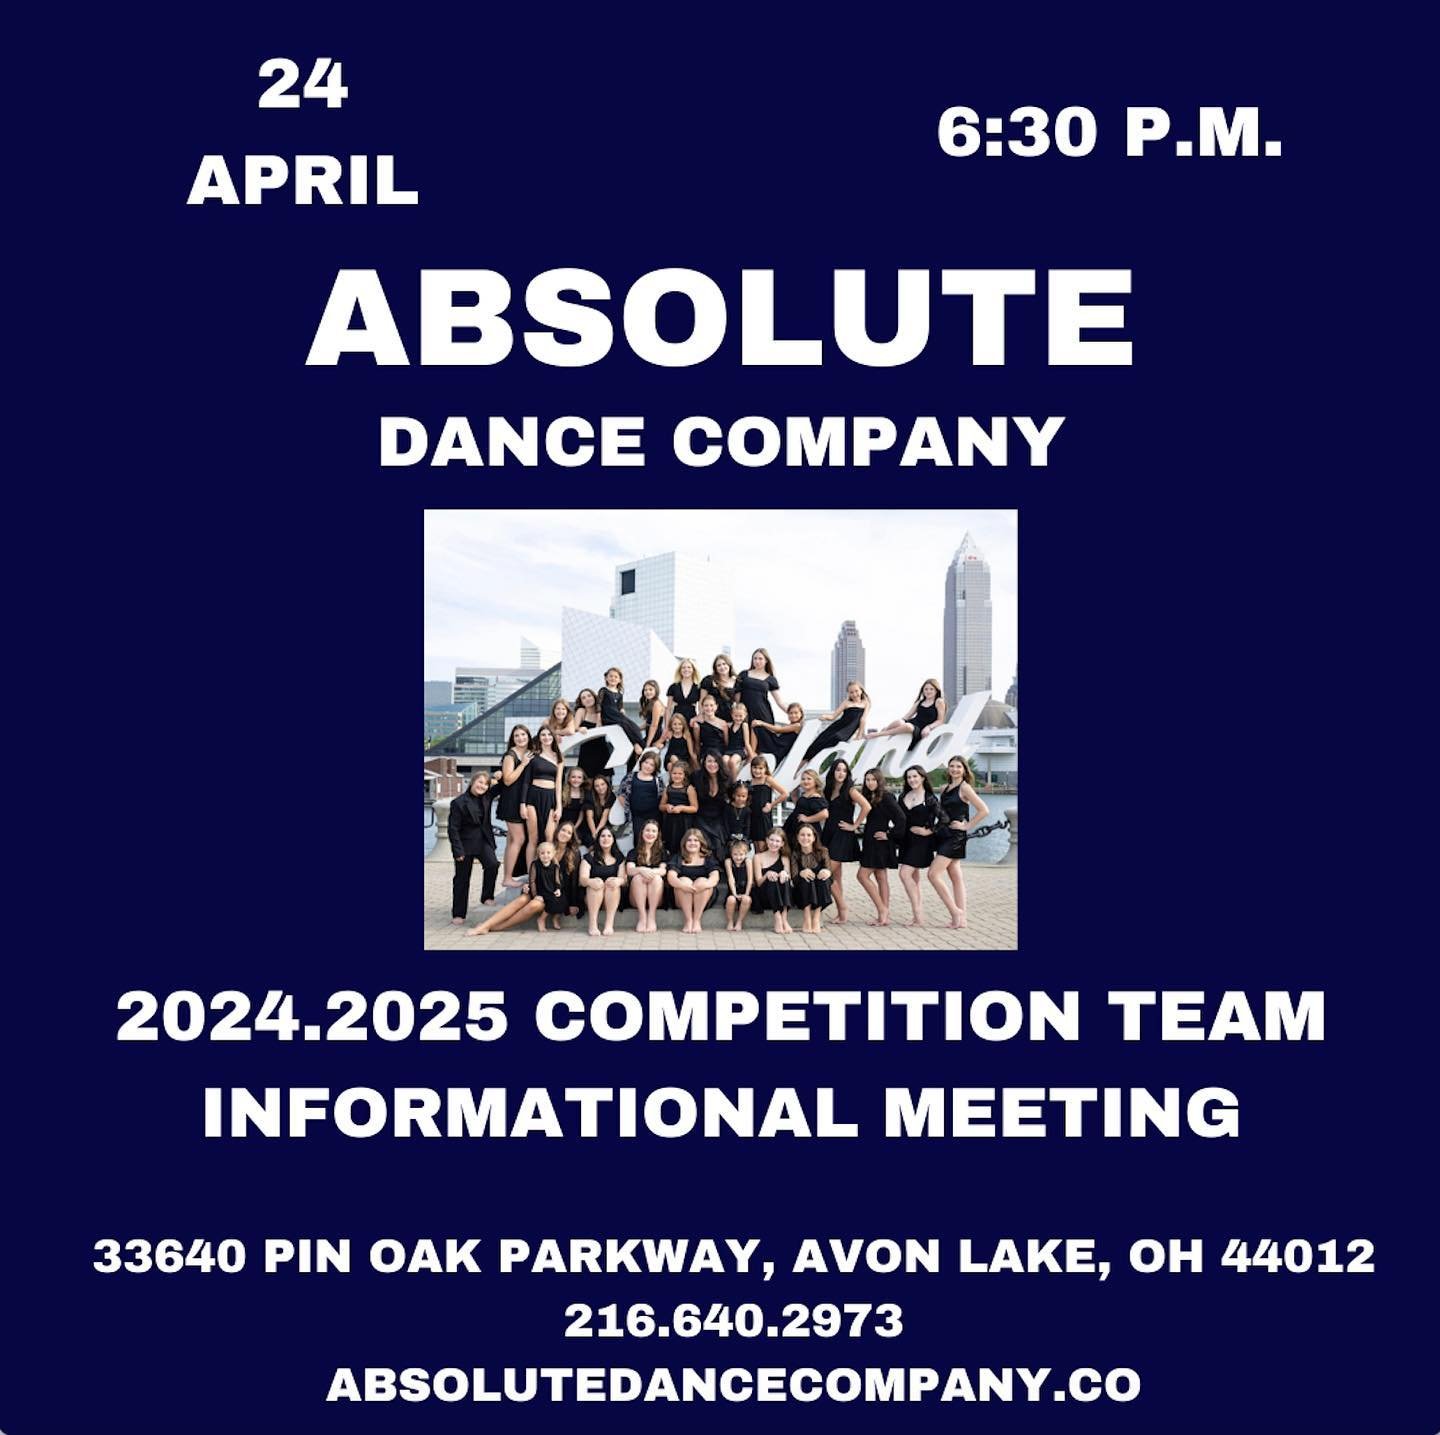 Is your dancer interested in auditioning for Absolute Dance Company&rsquo;s 2024.2025 Competition Team?

Please join us for our informational meeting, Wednesday, April 24th at 6:30 p.m. to learn more about our highly awarded competition teams, our aw